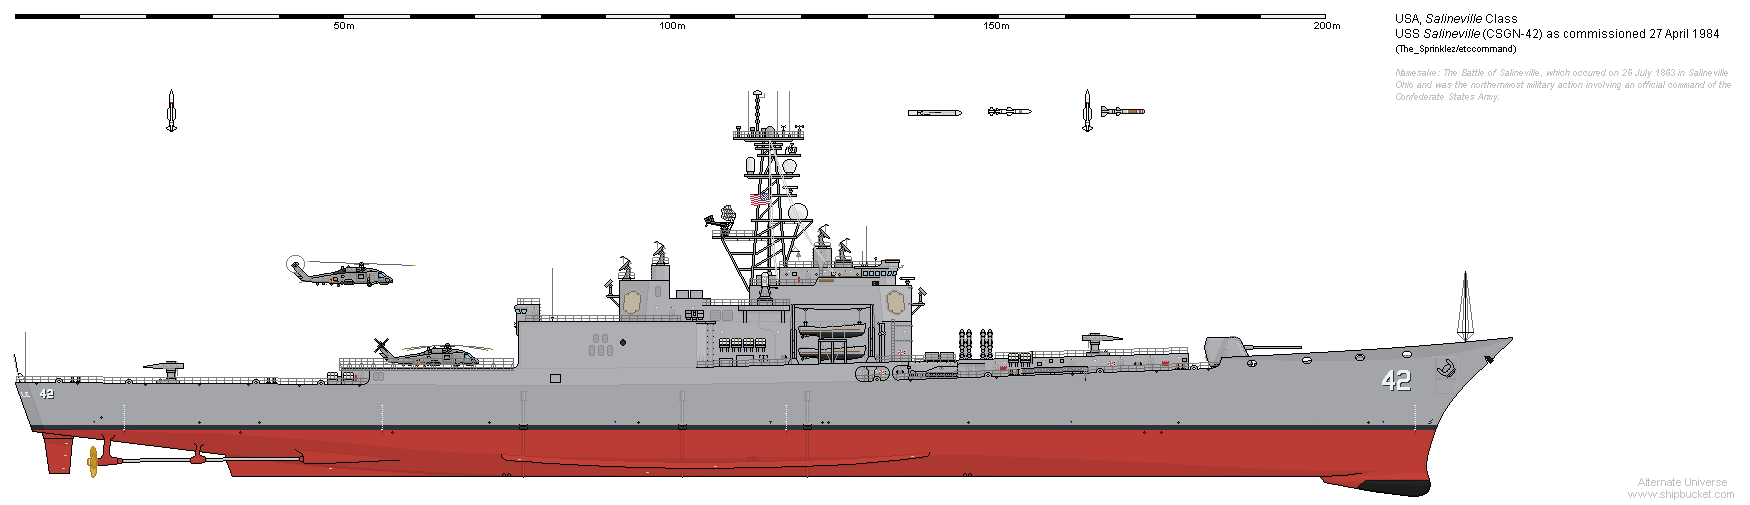 CSGN-42 Salineville as commissioned